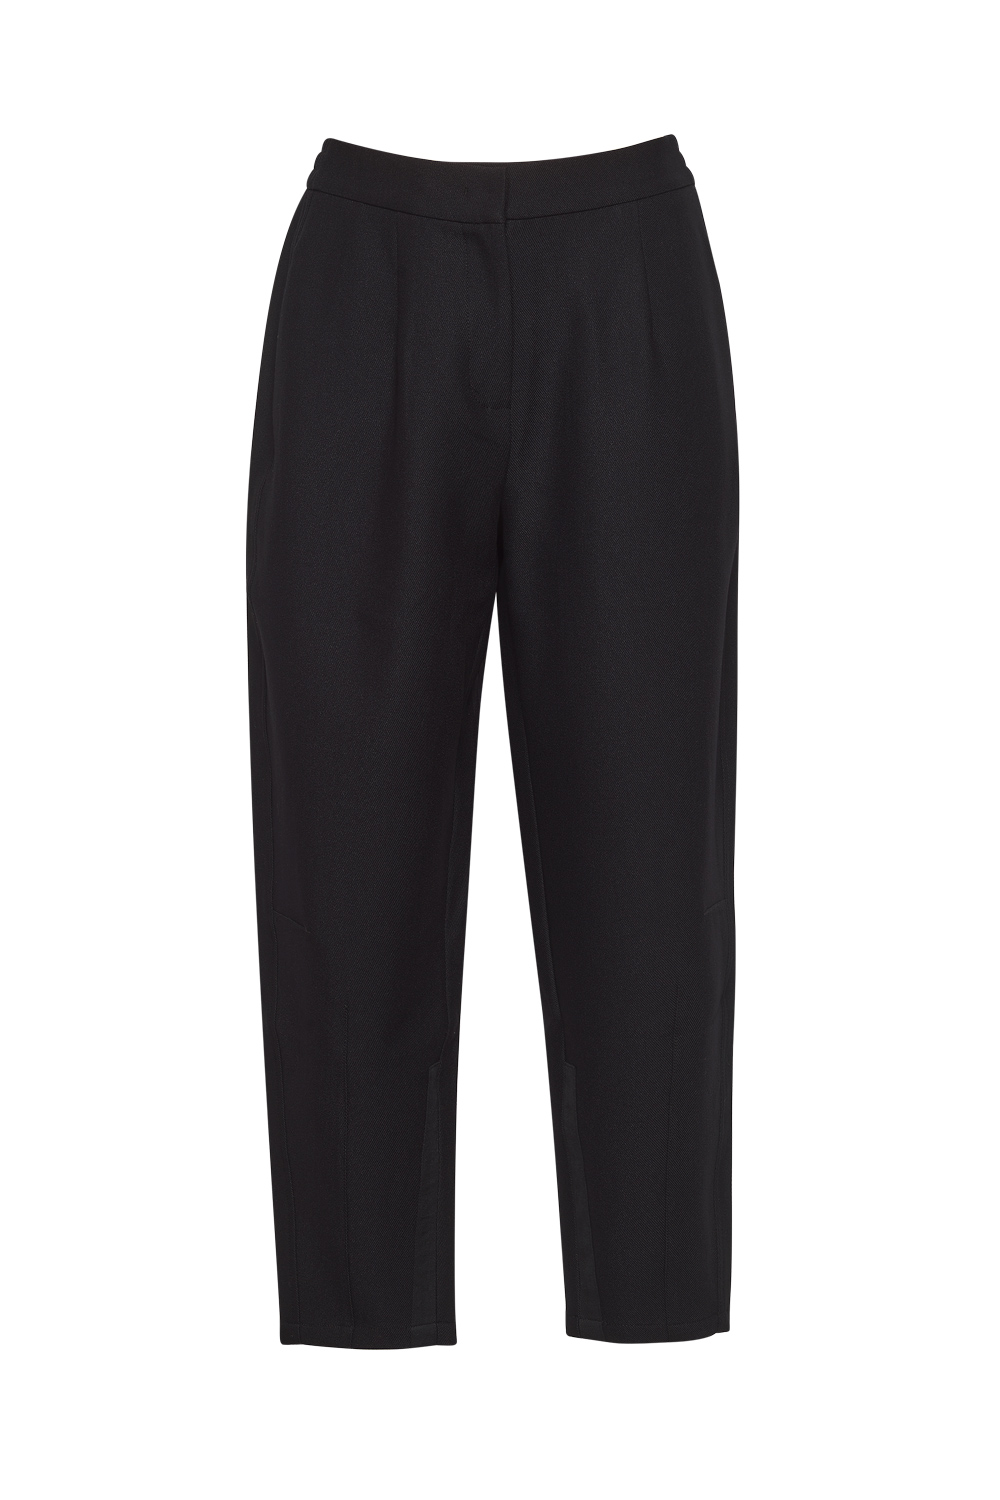 LOOBIES STORY - LS2331 Romeo Pant - Frontline Designer Clothes and ...